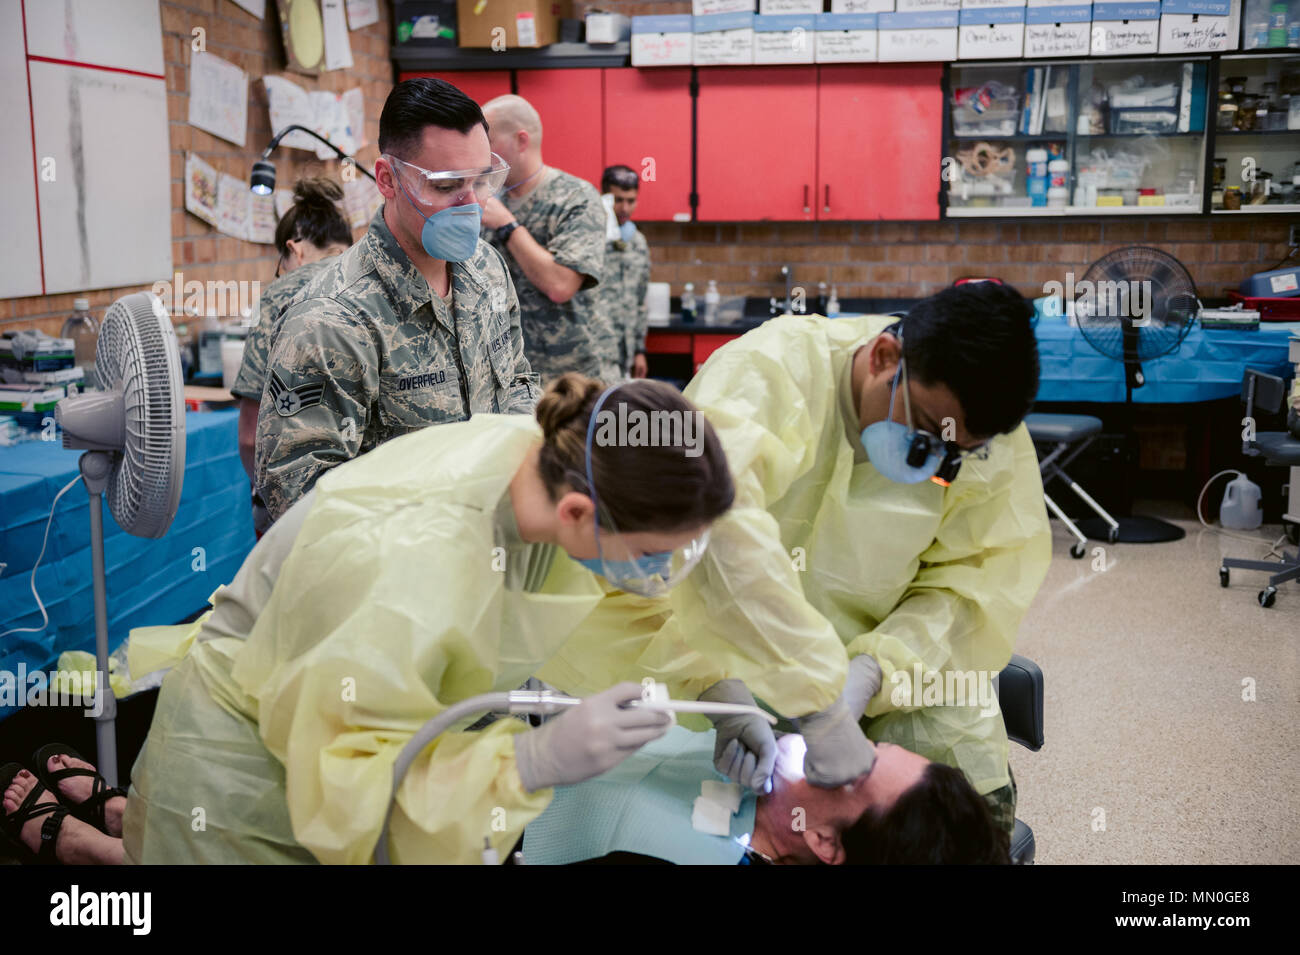 Air Force Senior Airman Anthony Overfield, a medical technician assigned to the 107th Medical Group, Niagara Falls Air Reserve Station, New York Air National Guard, assists Staff Sgt. Ashley Hyatt, a dental technician assigned to the 452nd Aerospace Medical Squadron, Air Force Reserve Command, March Air Reserve Base, Calif., and Army Maj. Dheera Pamidimukkala, a dentist assigned to the 455th Dental Company, Devens Reserve Forces Training Area, Army Reserve Command, Mass., with a dental procedure as part of the Smoky Mountain Innovative Readiness Training mission, Bryson City, N.C., Aug. 4, 201 Stock Photo